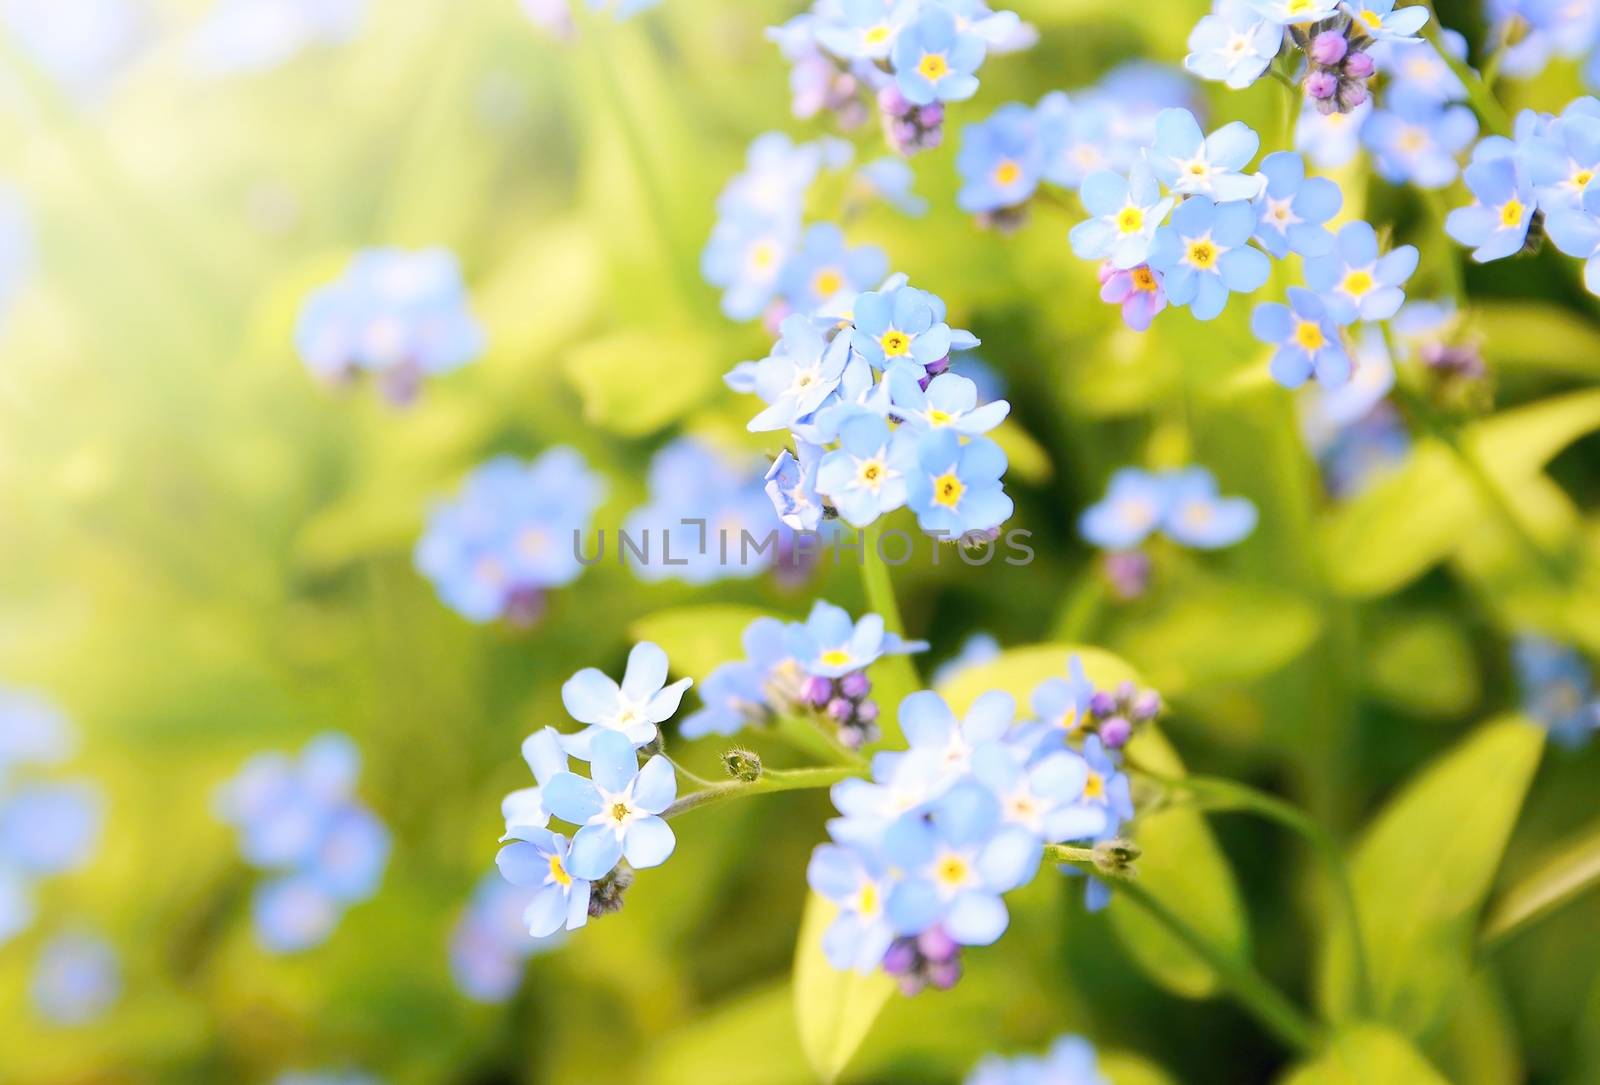 Forget me not plant by hamik